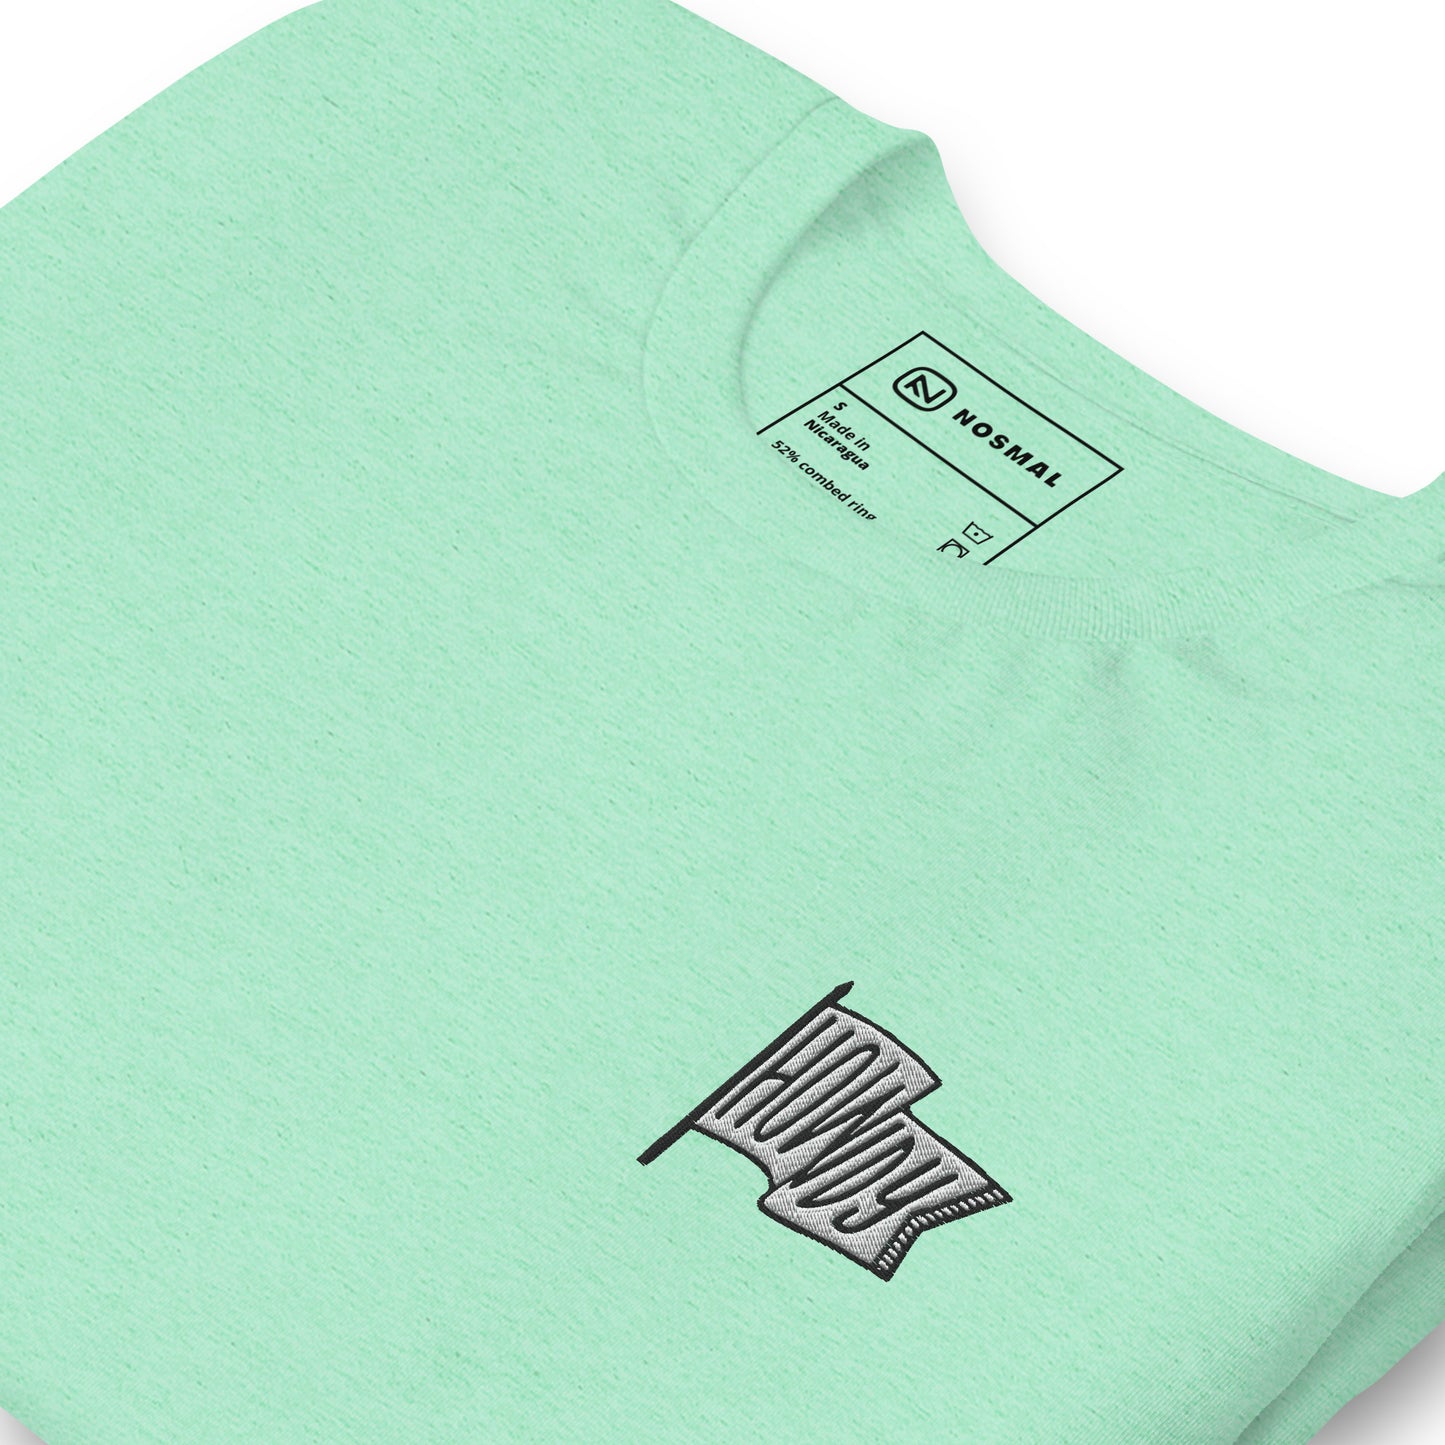 Angled close up howdy embroidered design on heather mint unisex t-shirt.